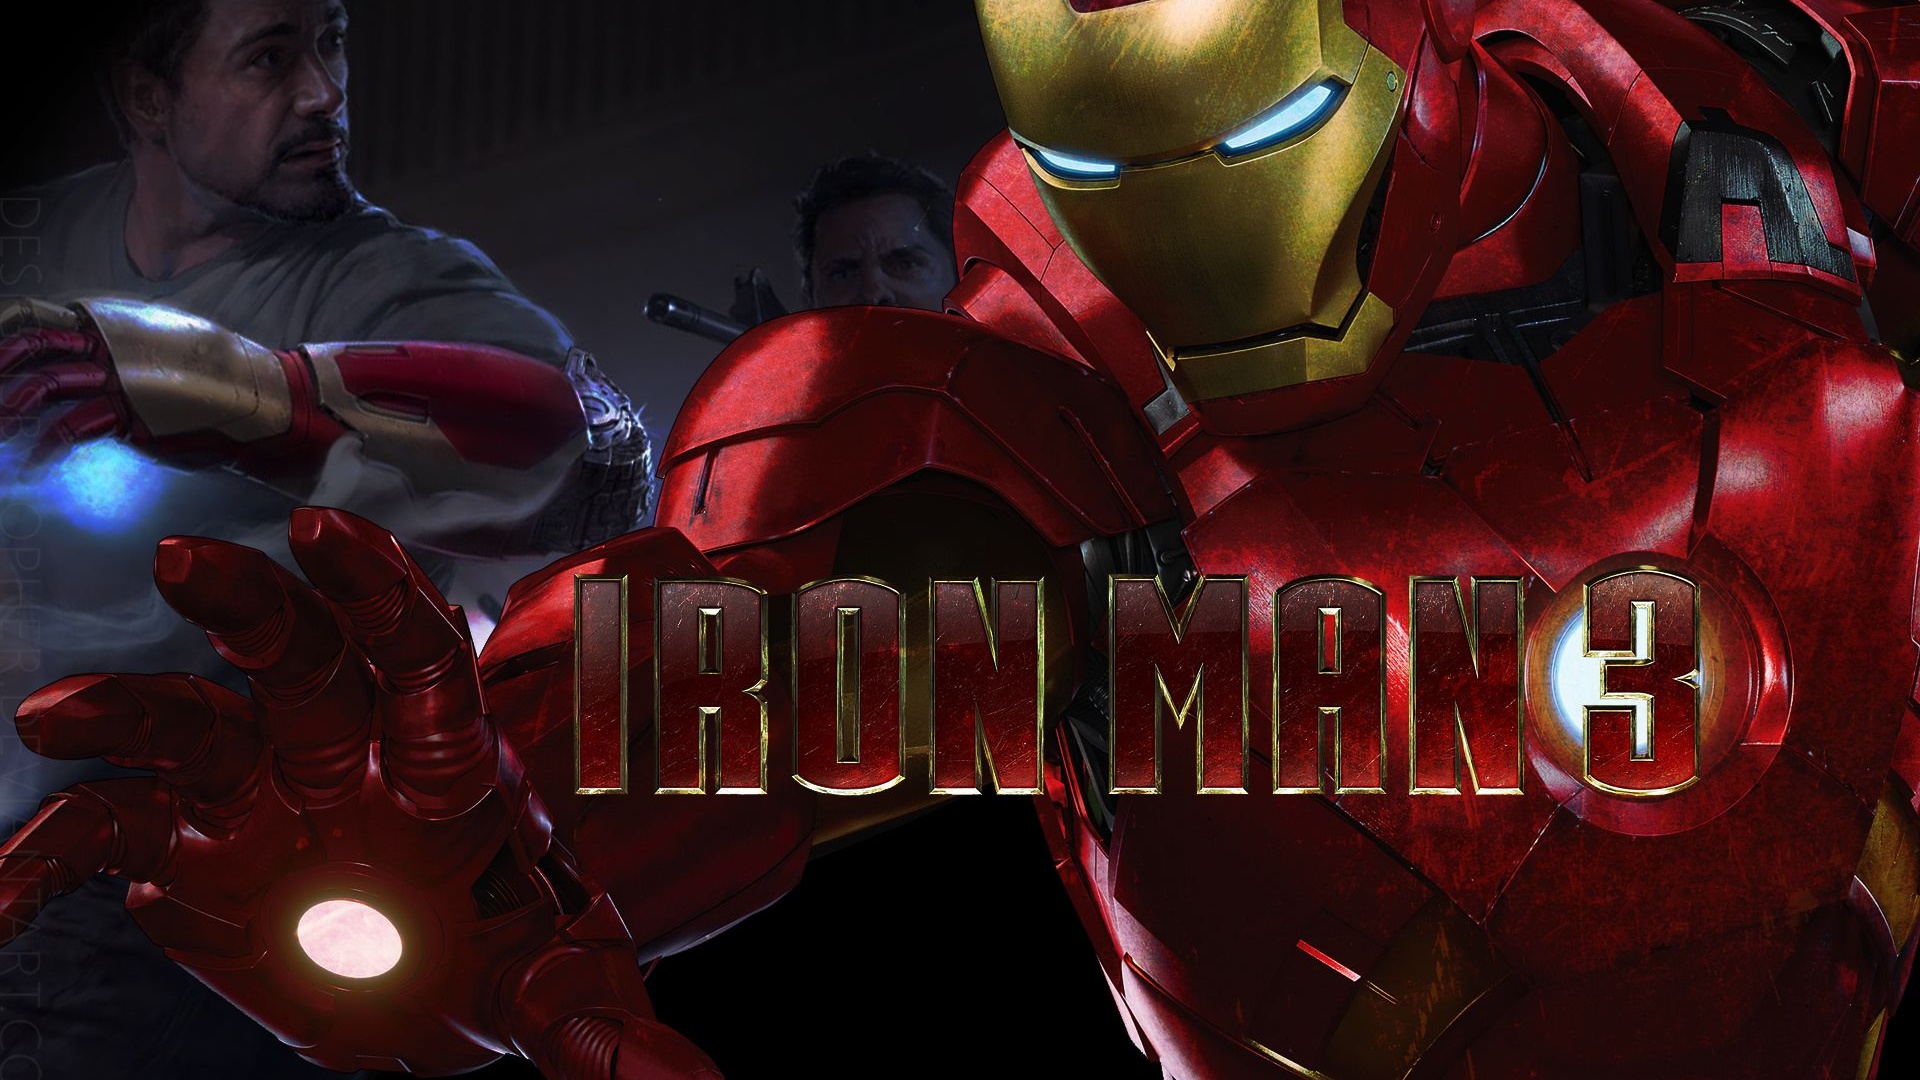 Iron Man Wallpaper HD Other Bwalles Gallery